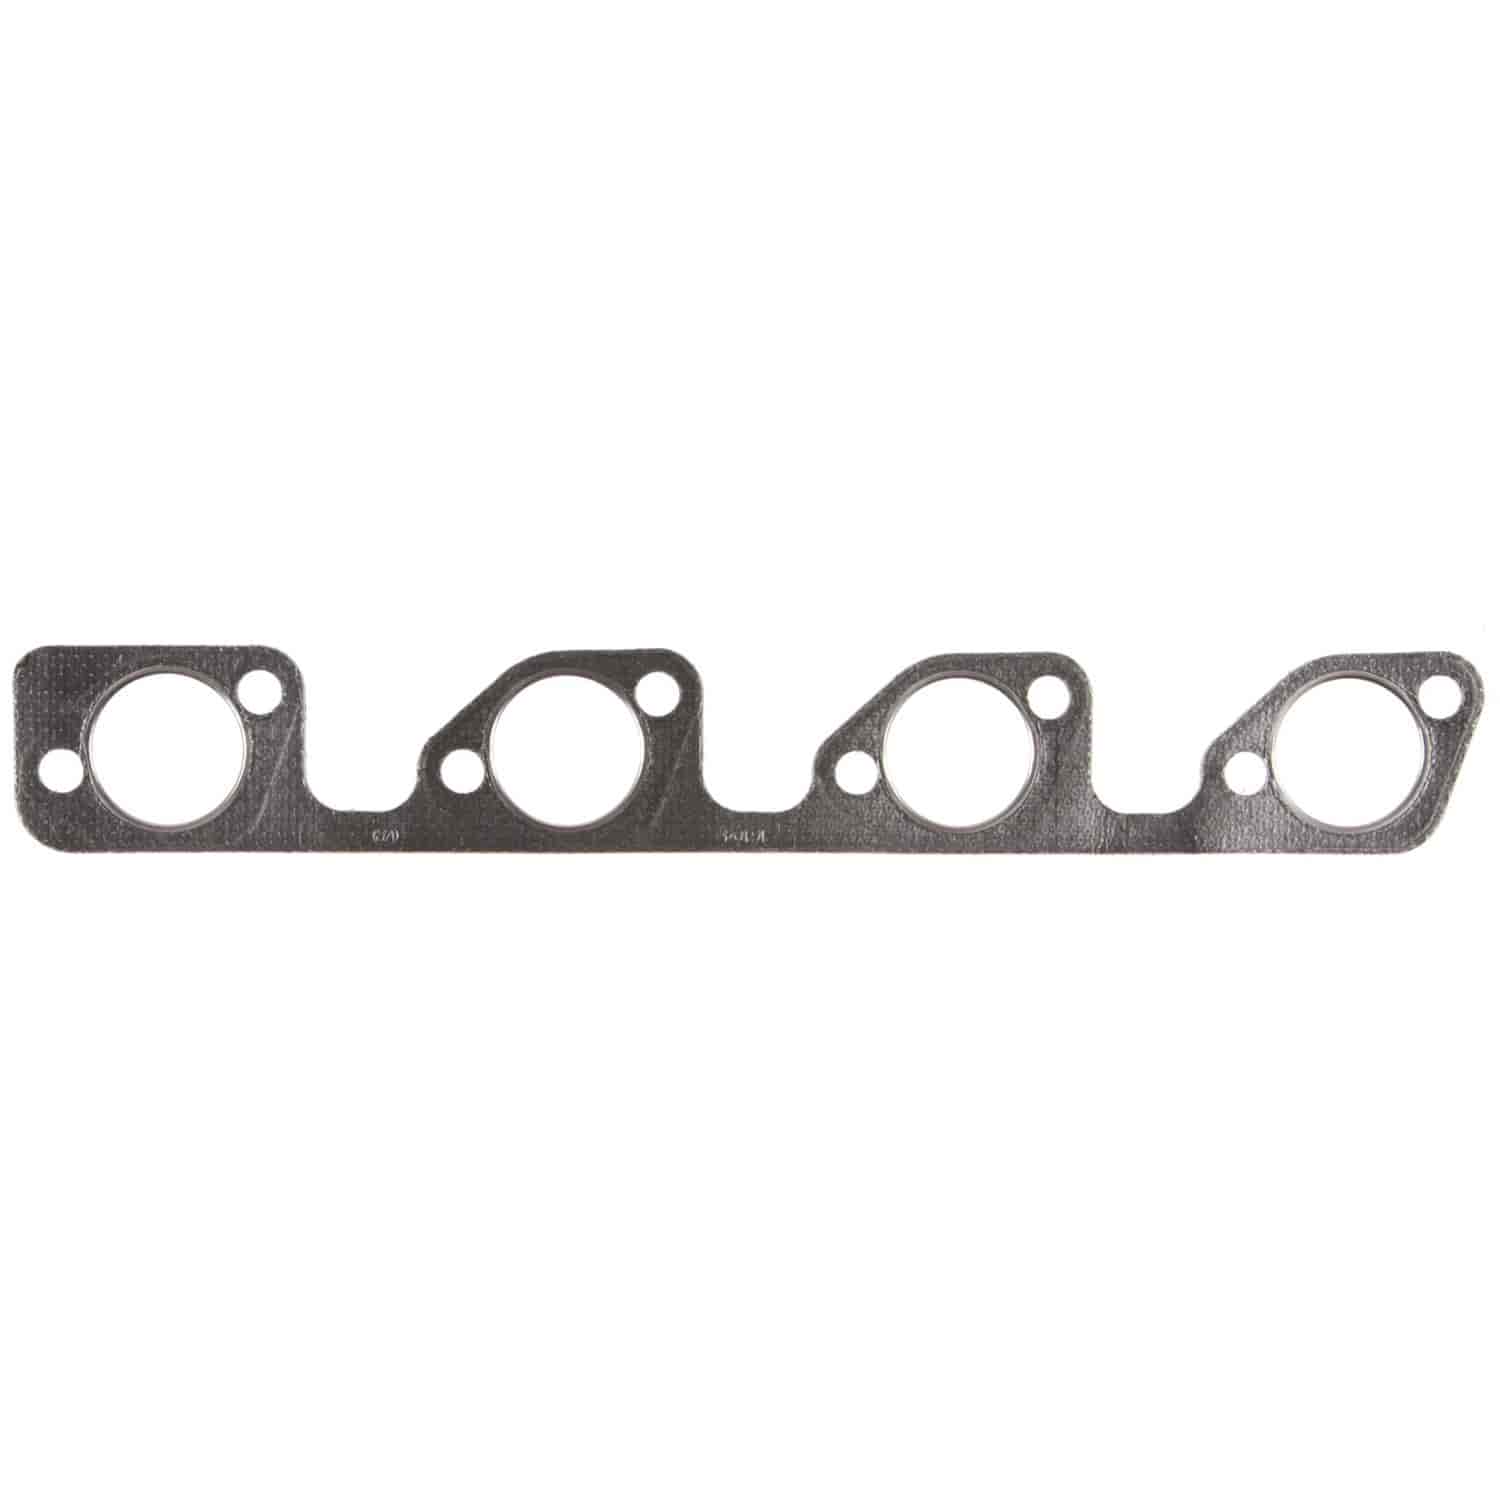 Exhaust Manifold Gasket 1993-2001 Ford L4 2.3/2.5L